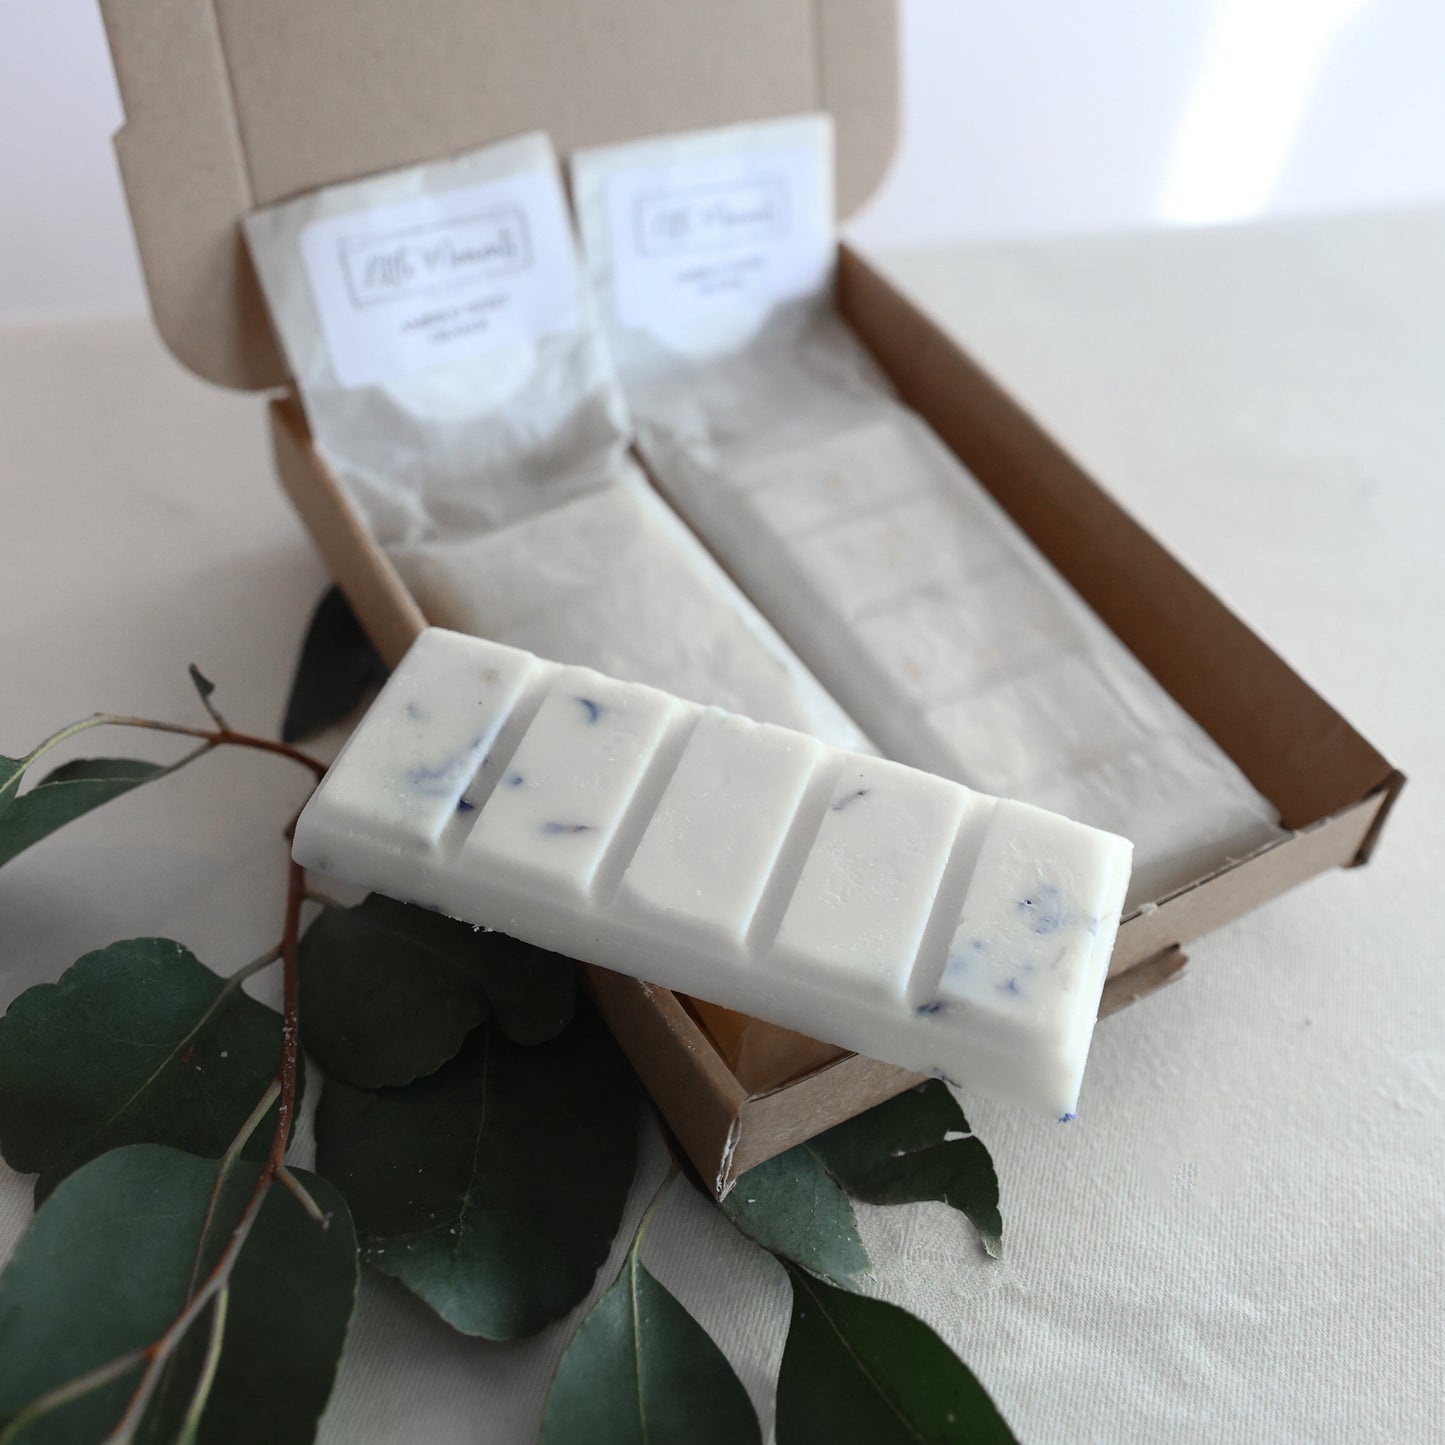 postal box containing three hand poured soy wax melt bars in various fragrances